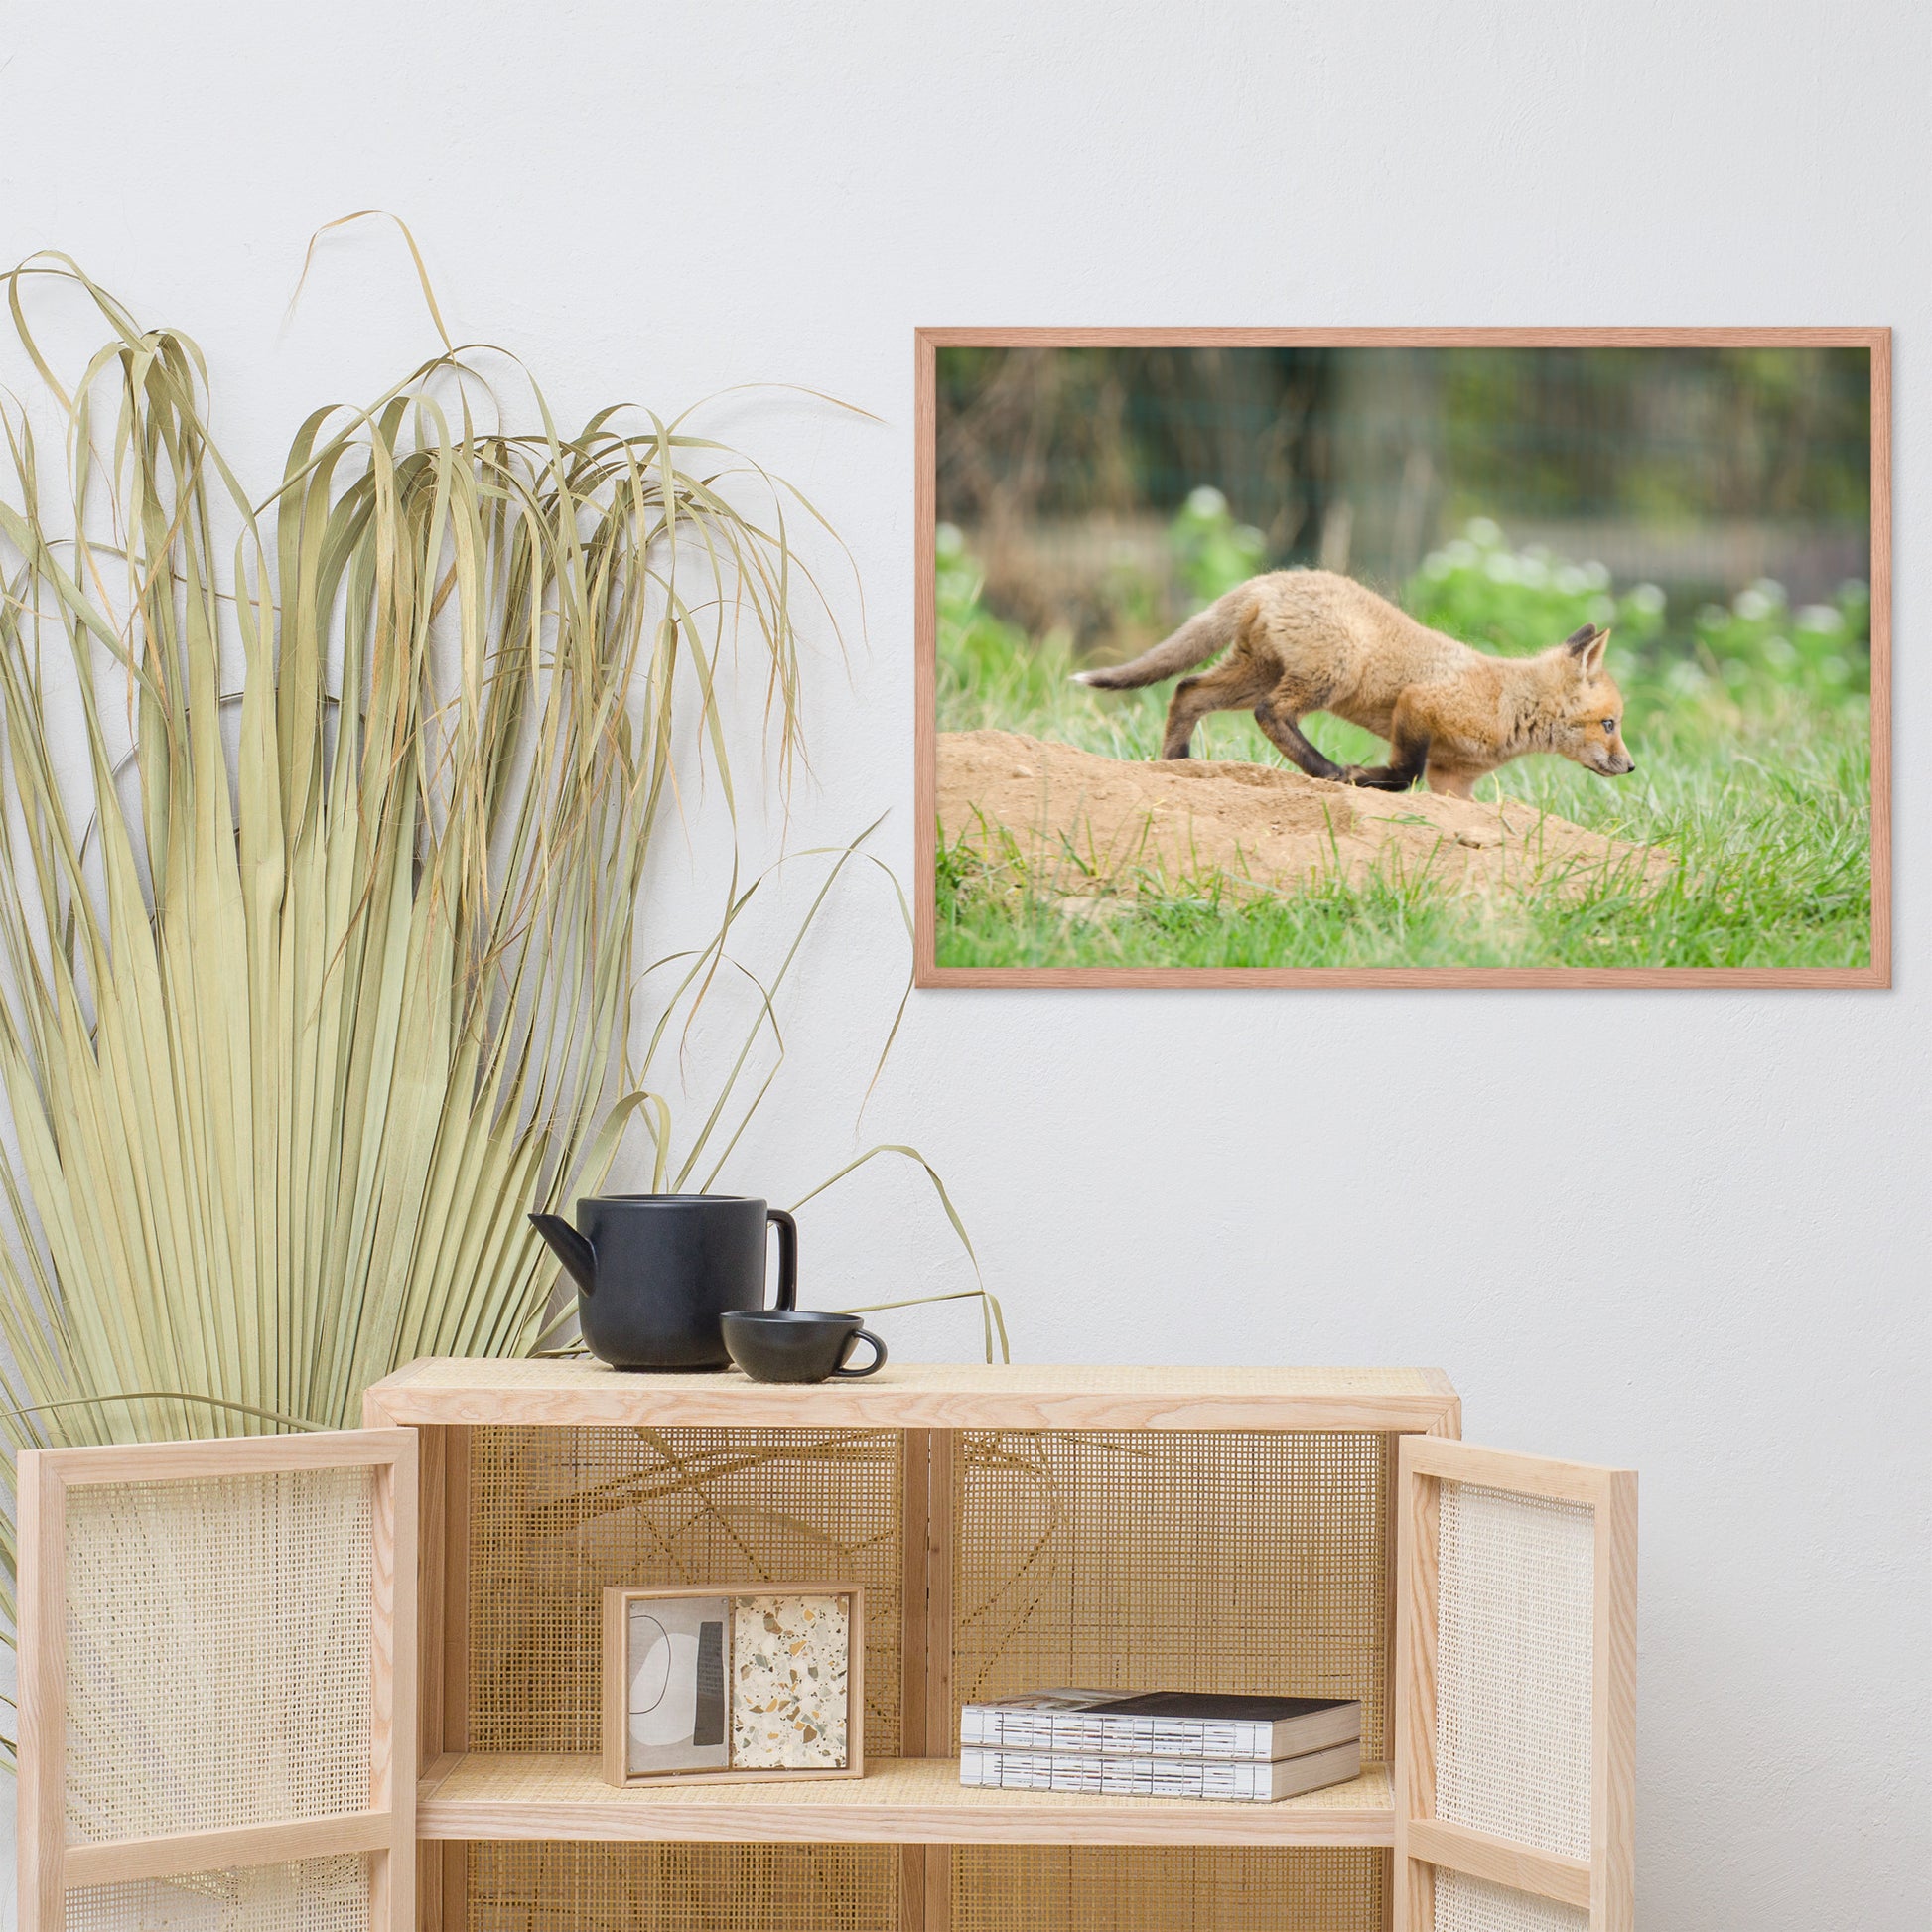 Wall Animals For Nursery: Baby Fox Pup In Meadow - Animal / Wildlife / Nature Artwork - Wall Decor - Framed Wall Art Print